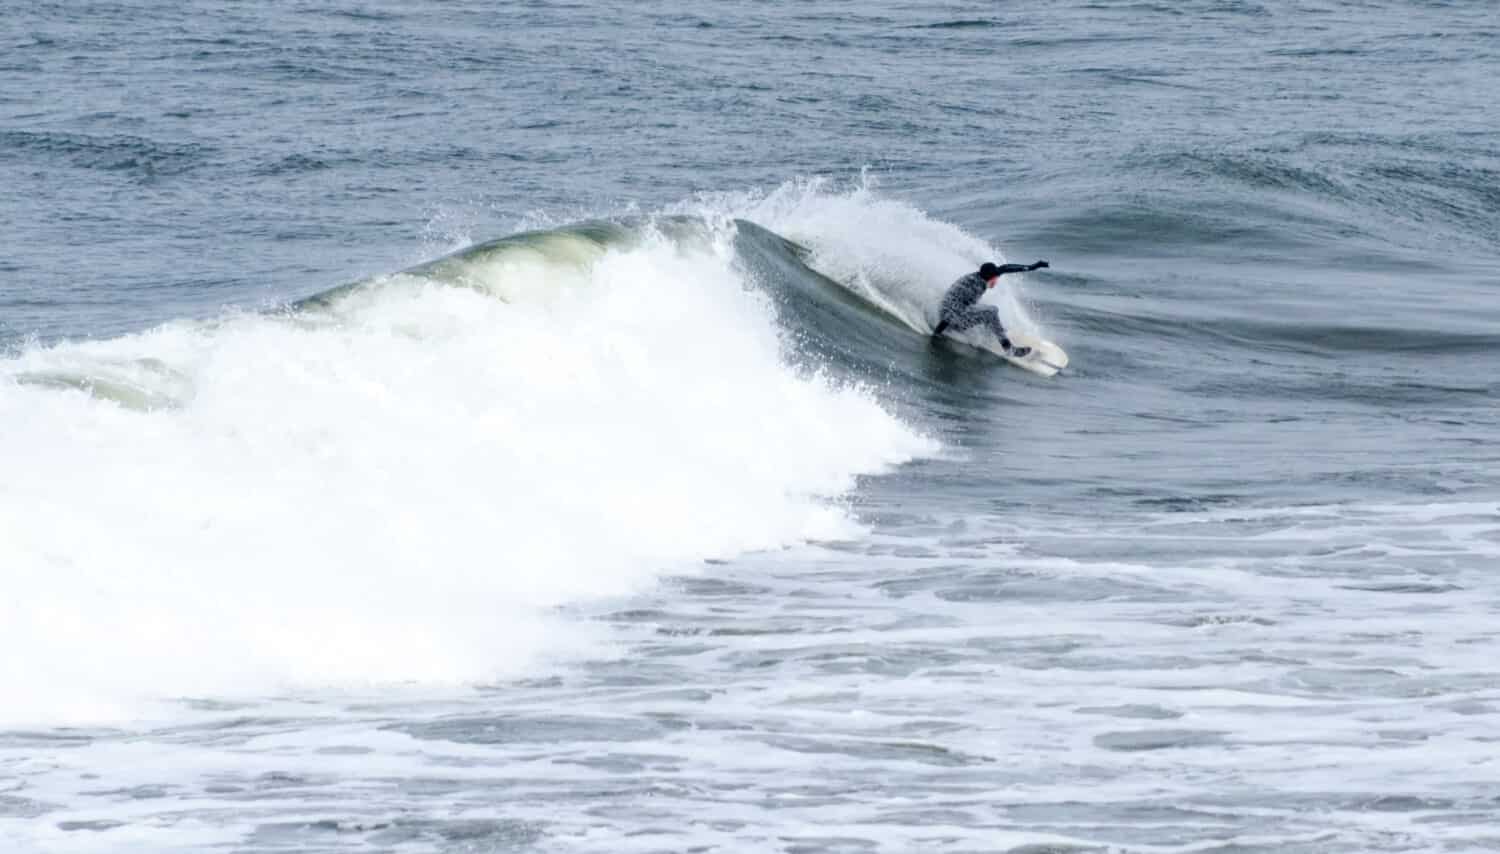 A surfer rides a large wave in Grays Harbor, Washington.